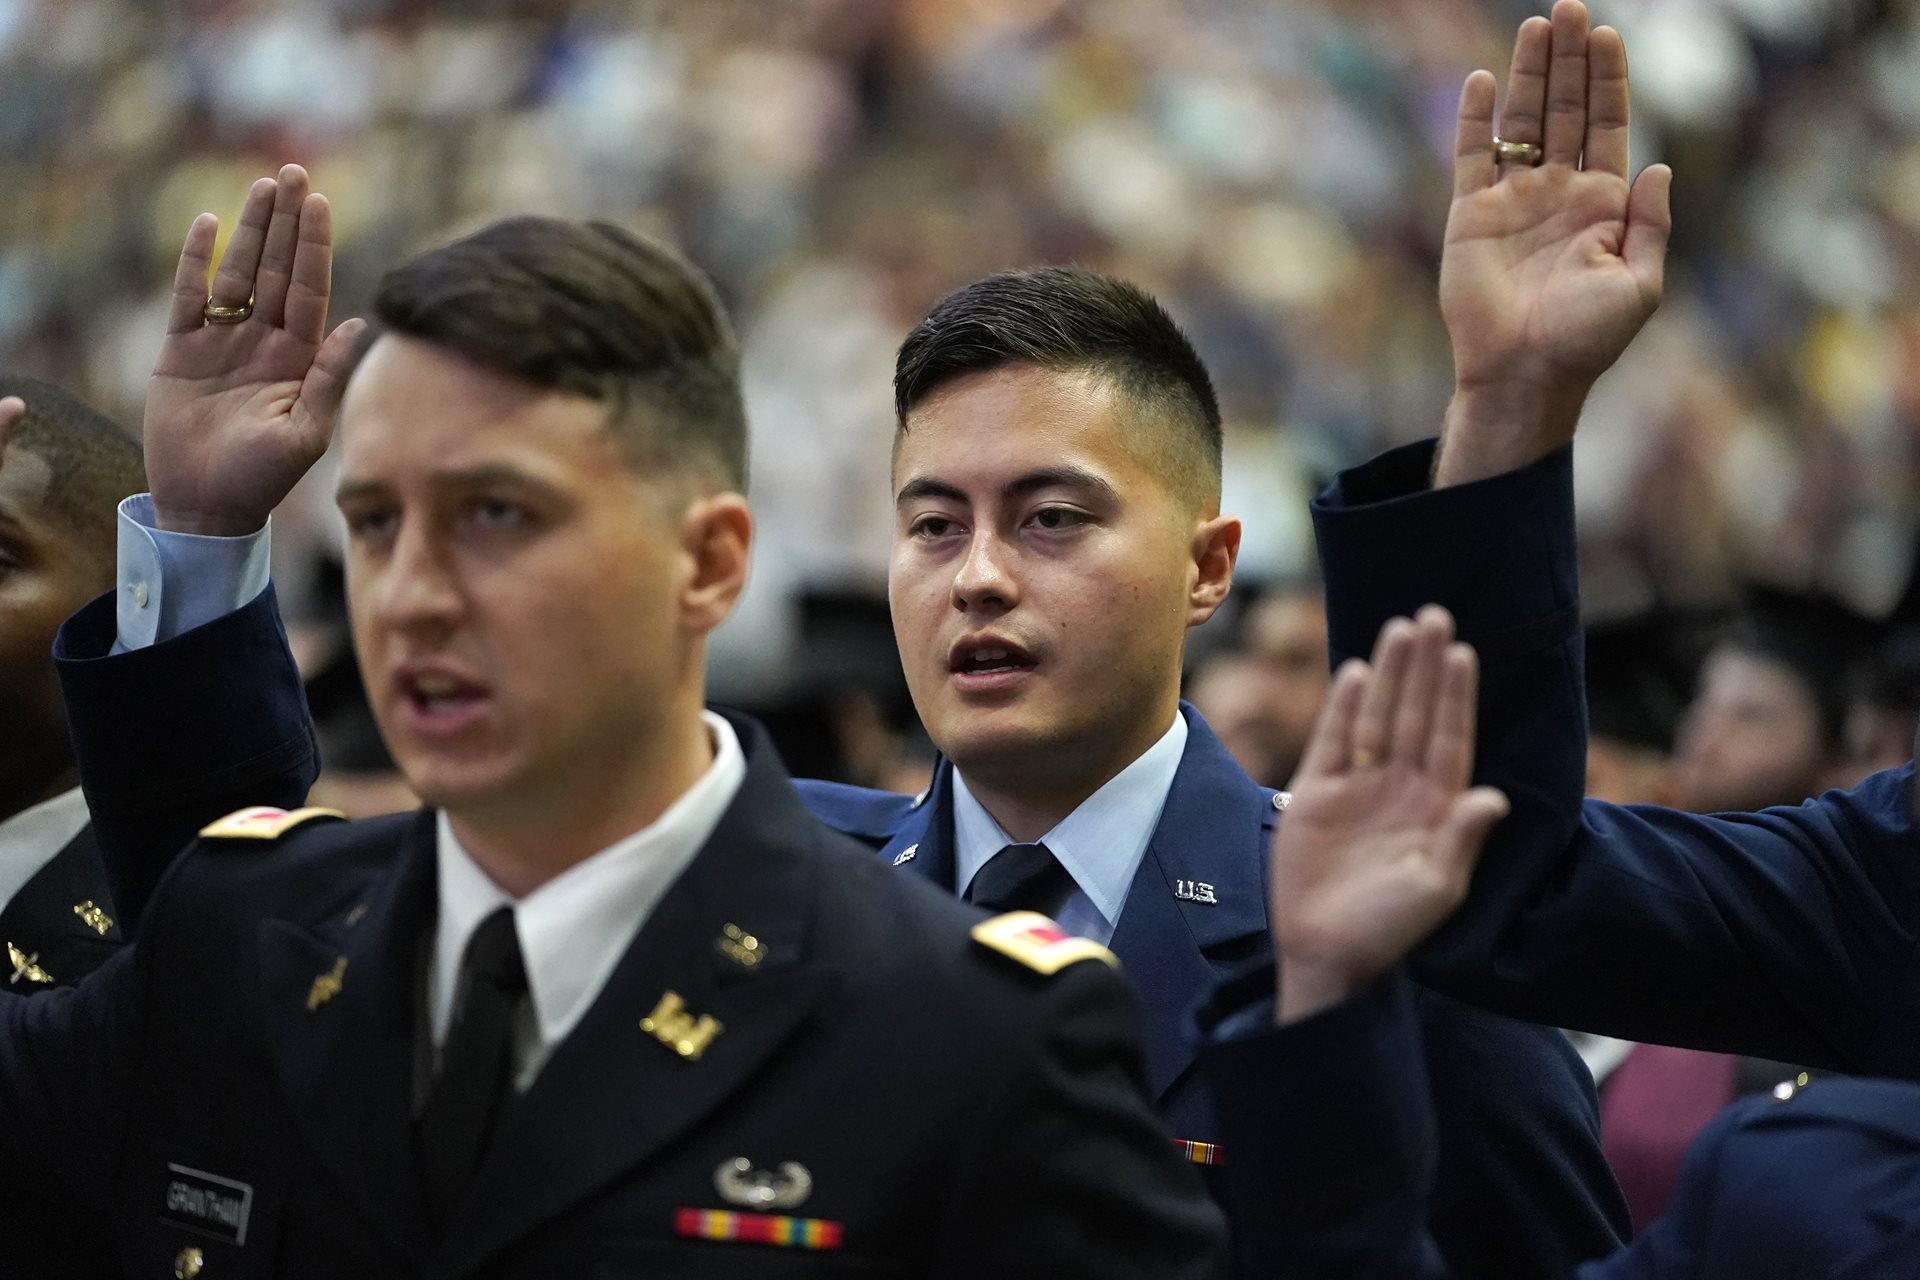 Cadets taking oath into U.S. Military